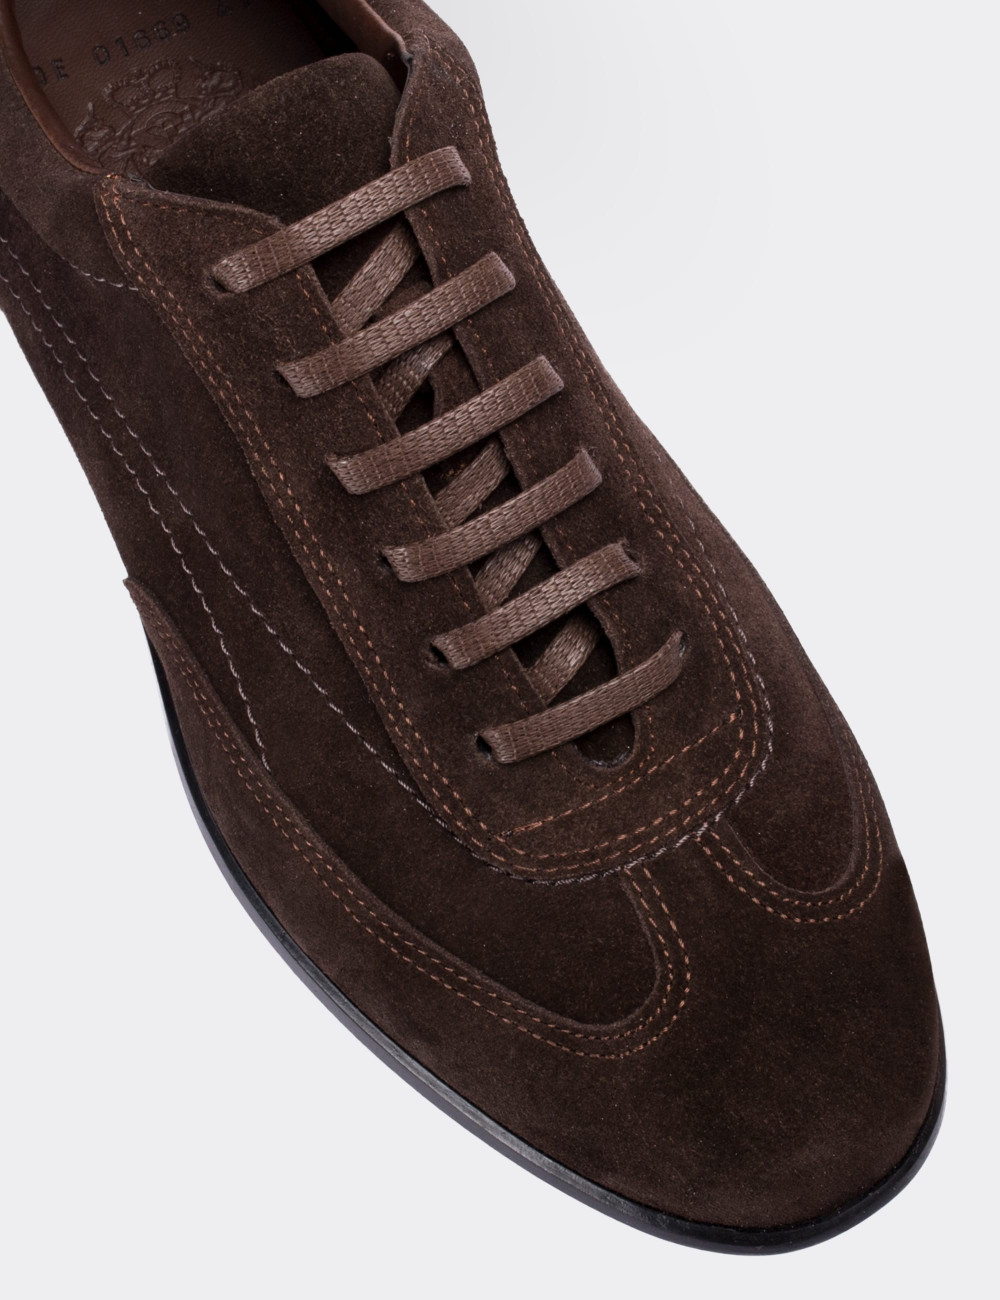 Brown Suede Leather Lace-up Shoes - 00321MKHVC07